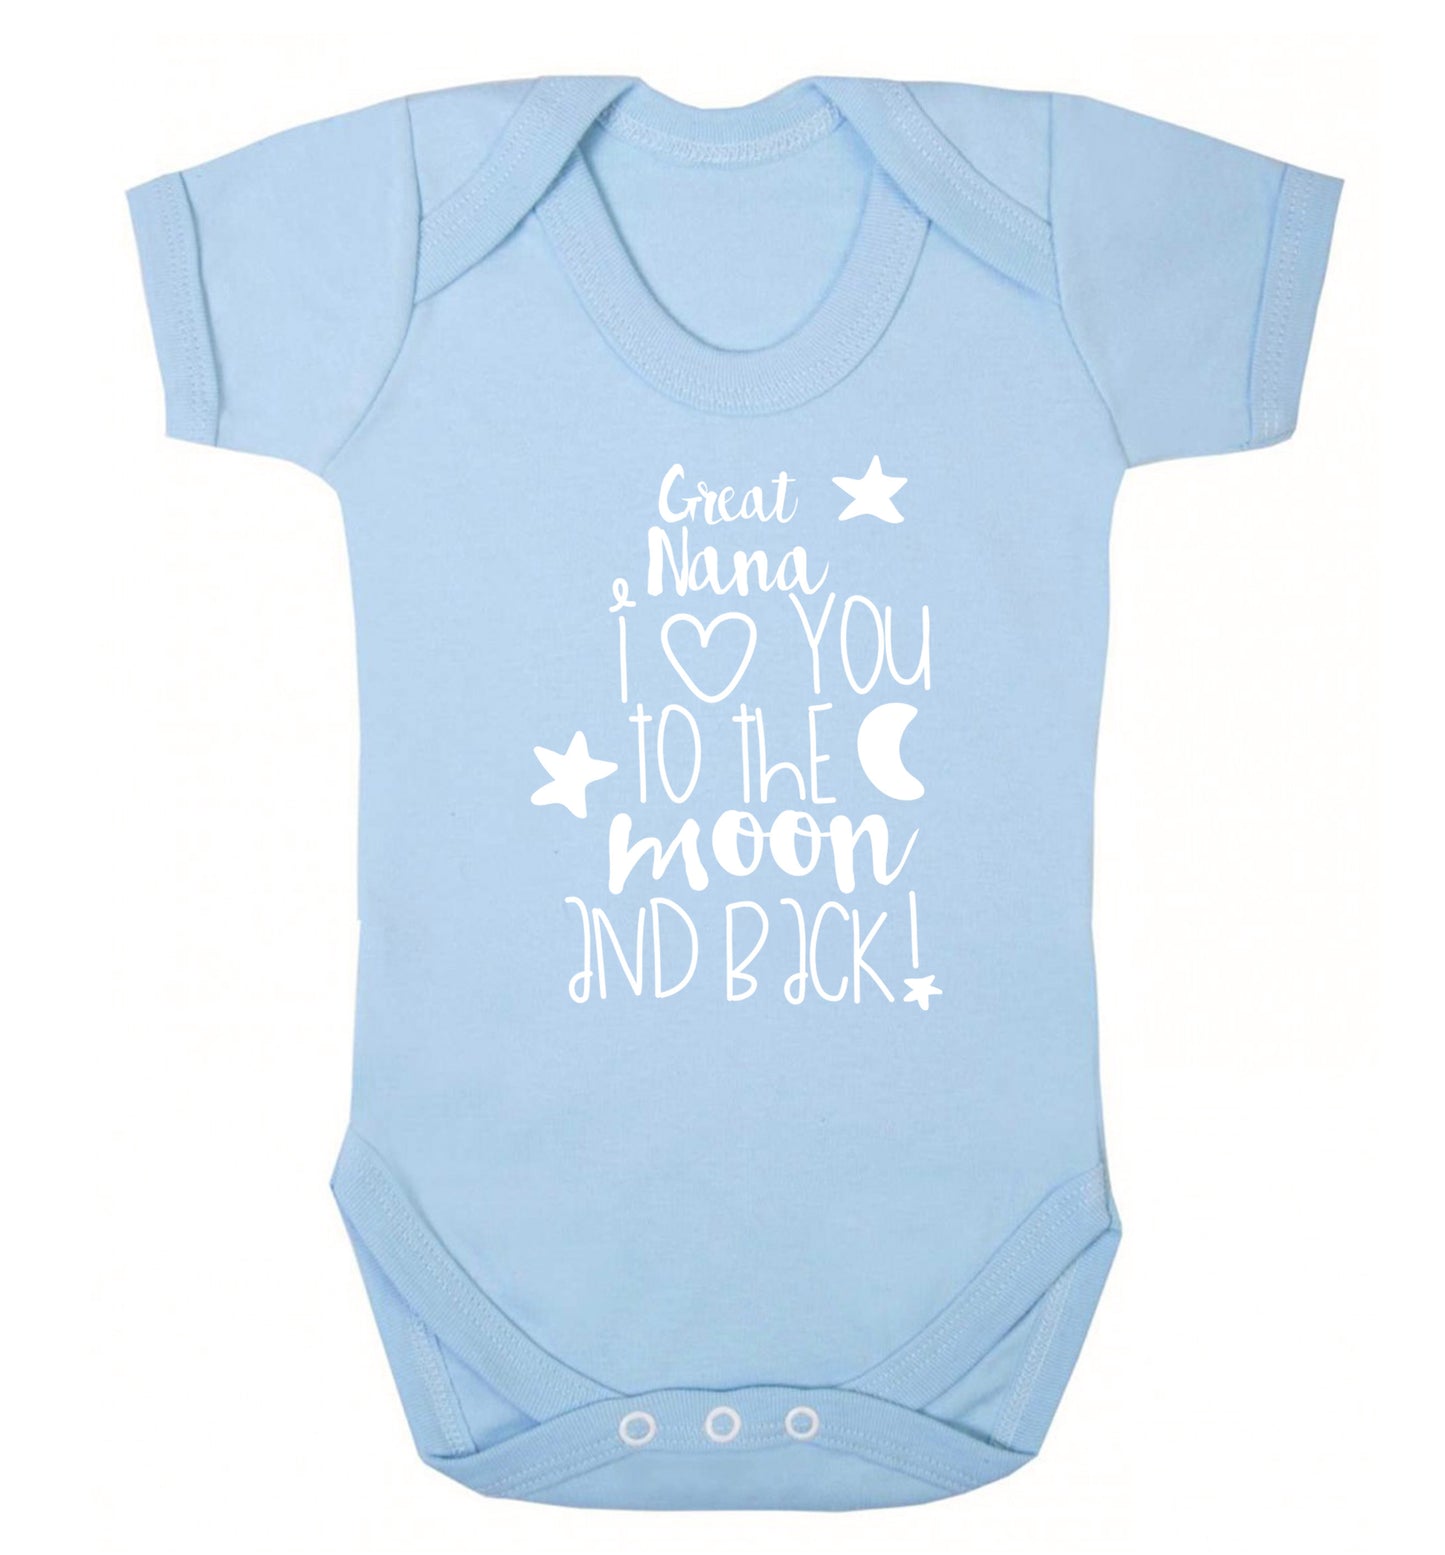 Great Nana I love you to the moon and back Baby Vest pale blue 18-24 months